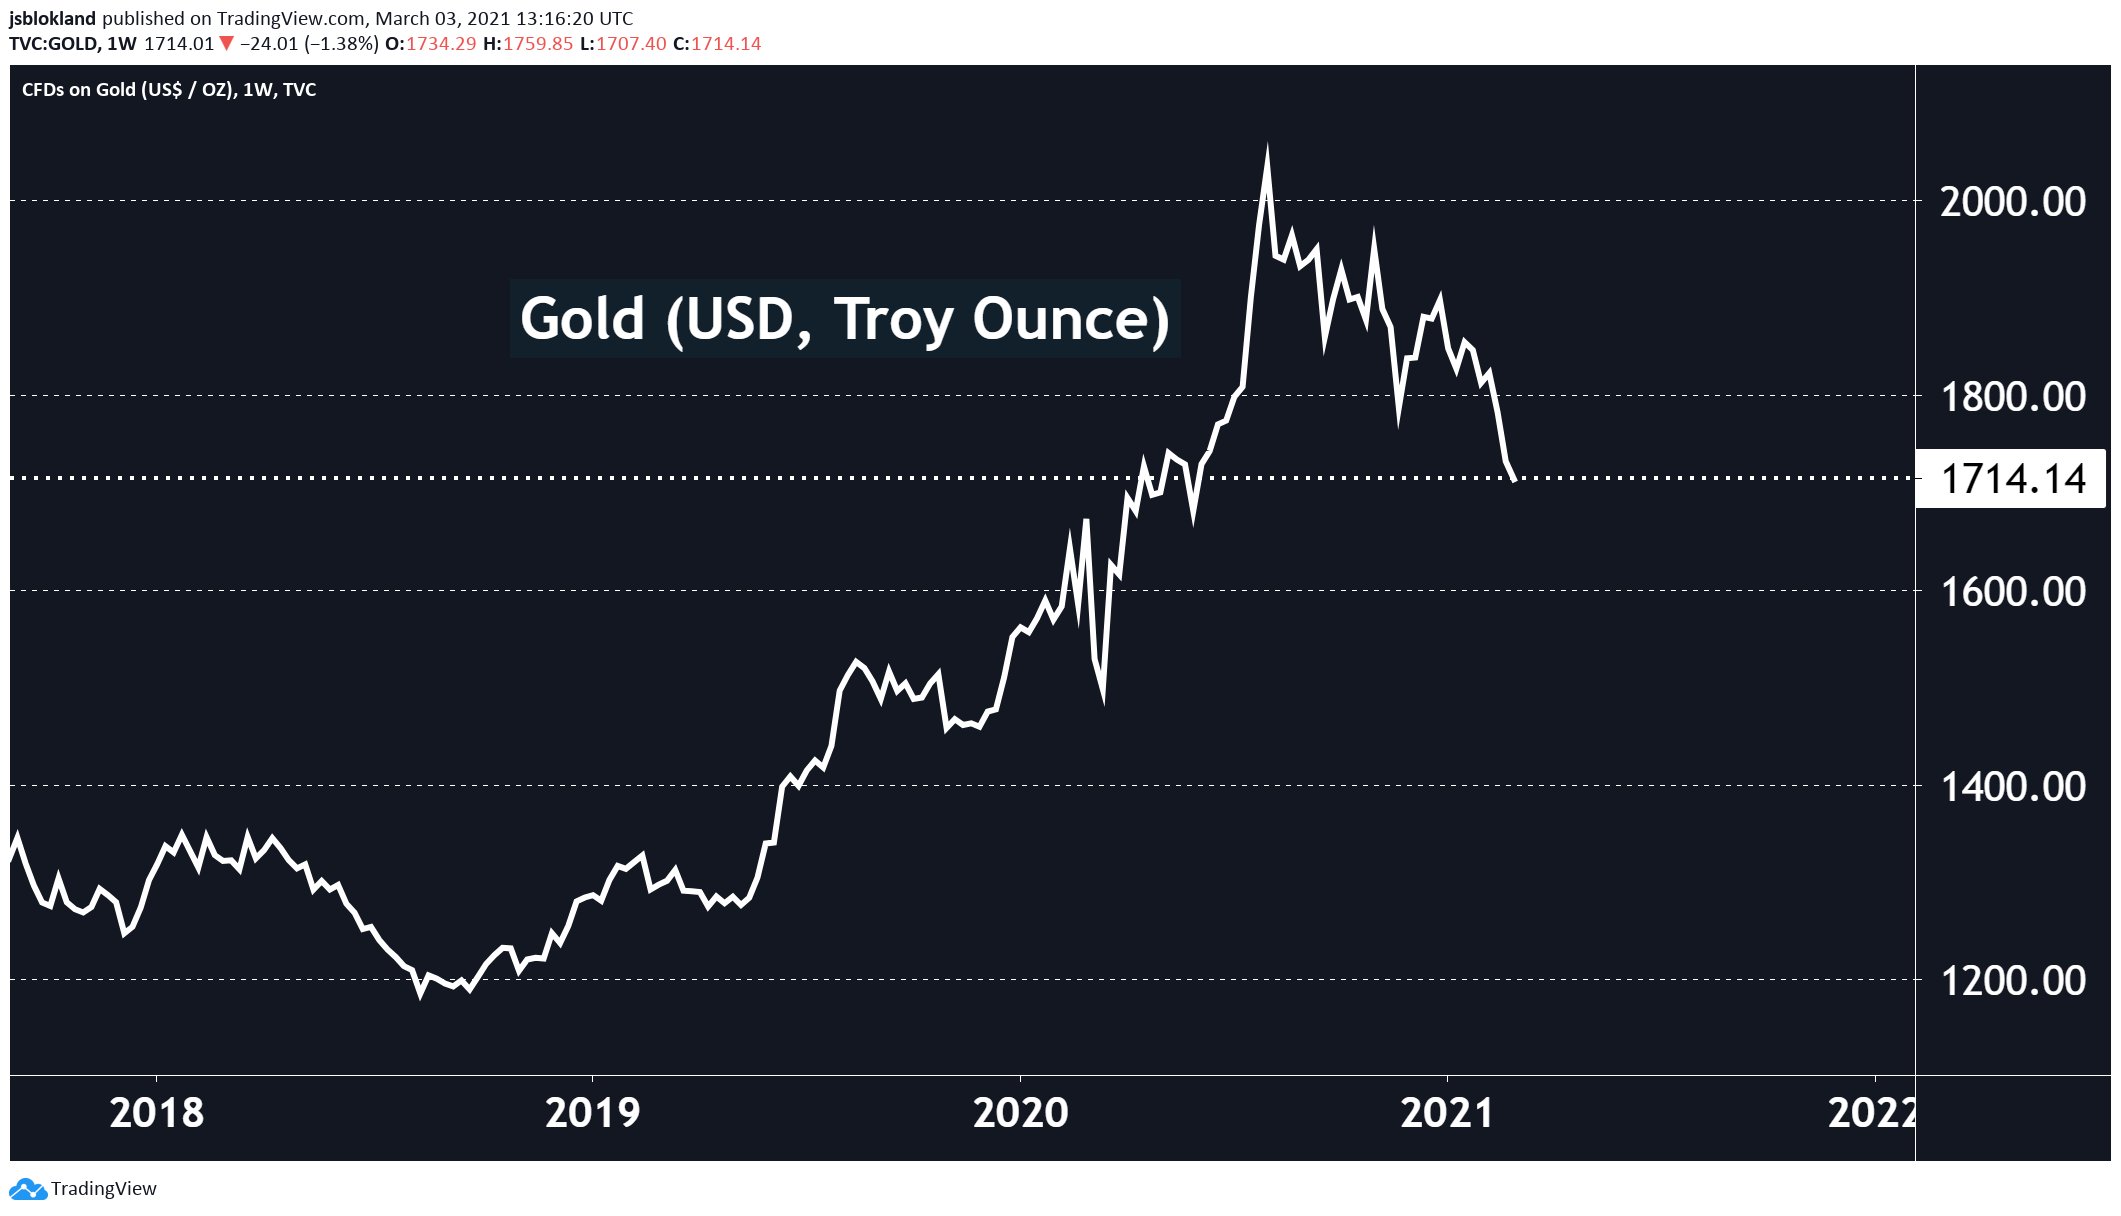 Gold is down 17% since August, but up 33% since 2019